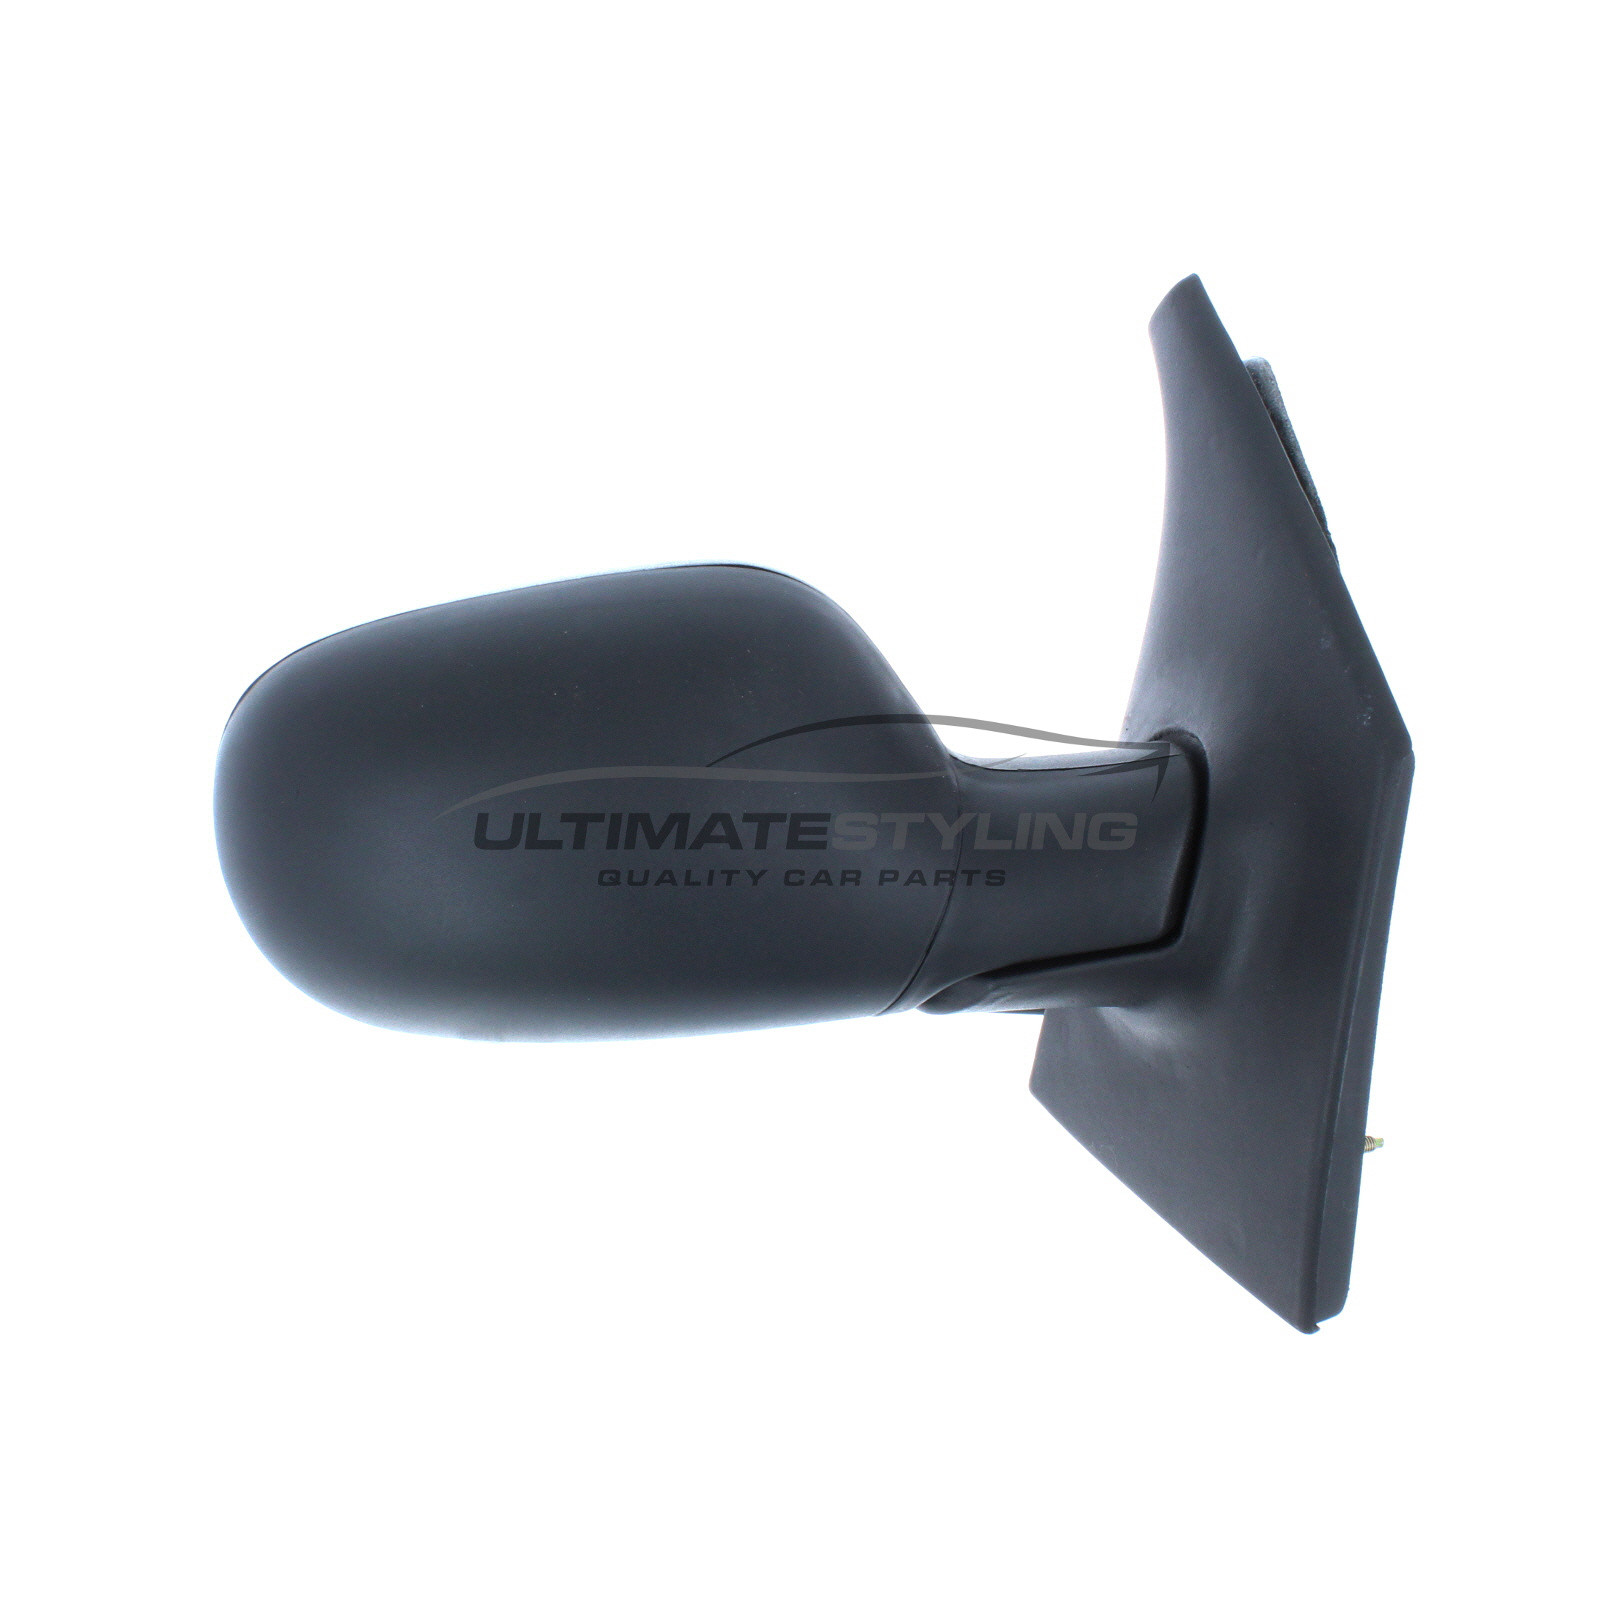 Renault Megane Wing Mirror / Door Mirror - Drivers Side (RH) - Cable adjustment - Non-Heated Glass - Black - Textured